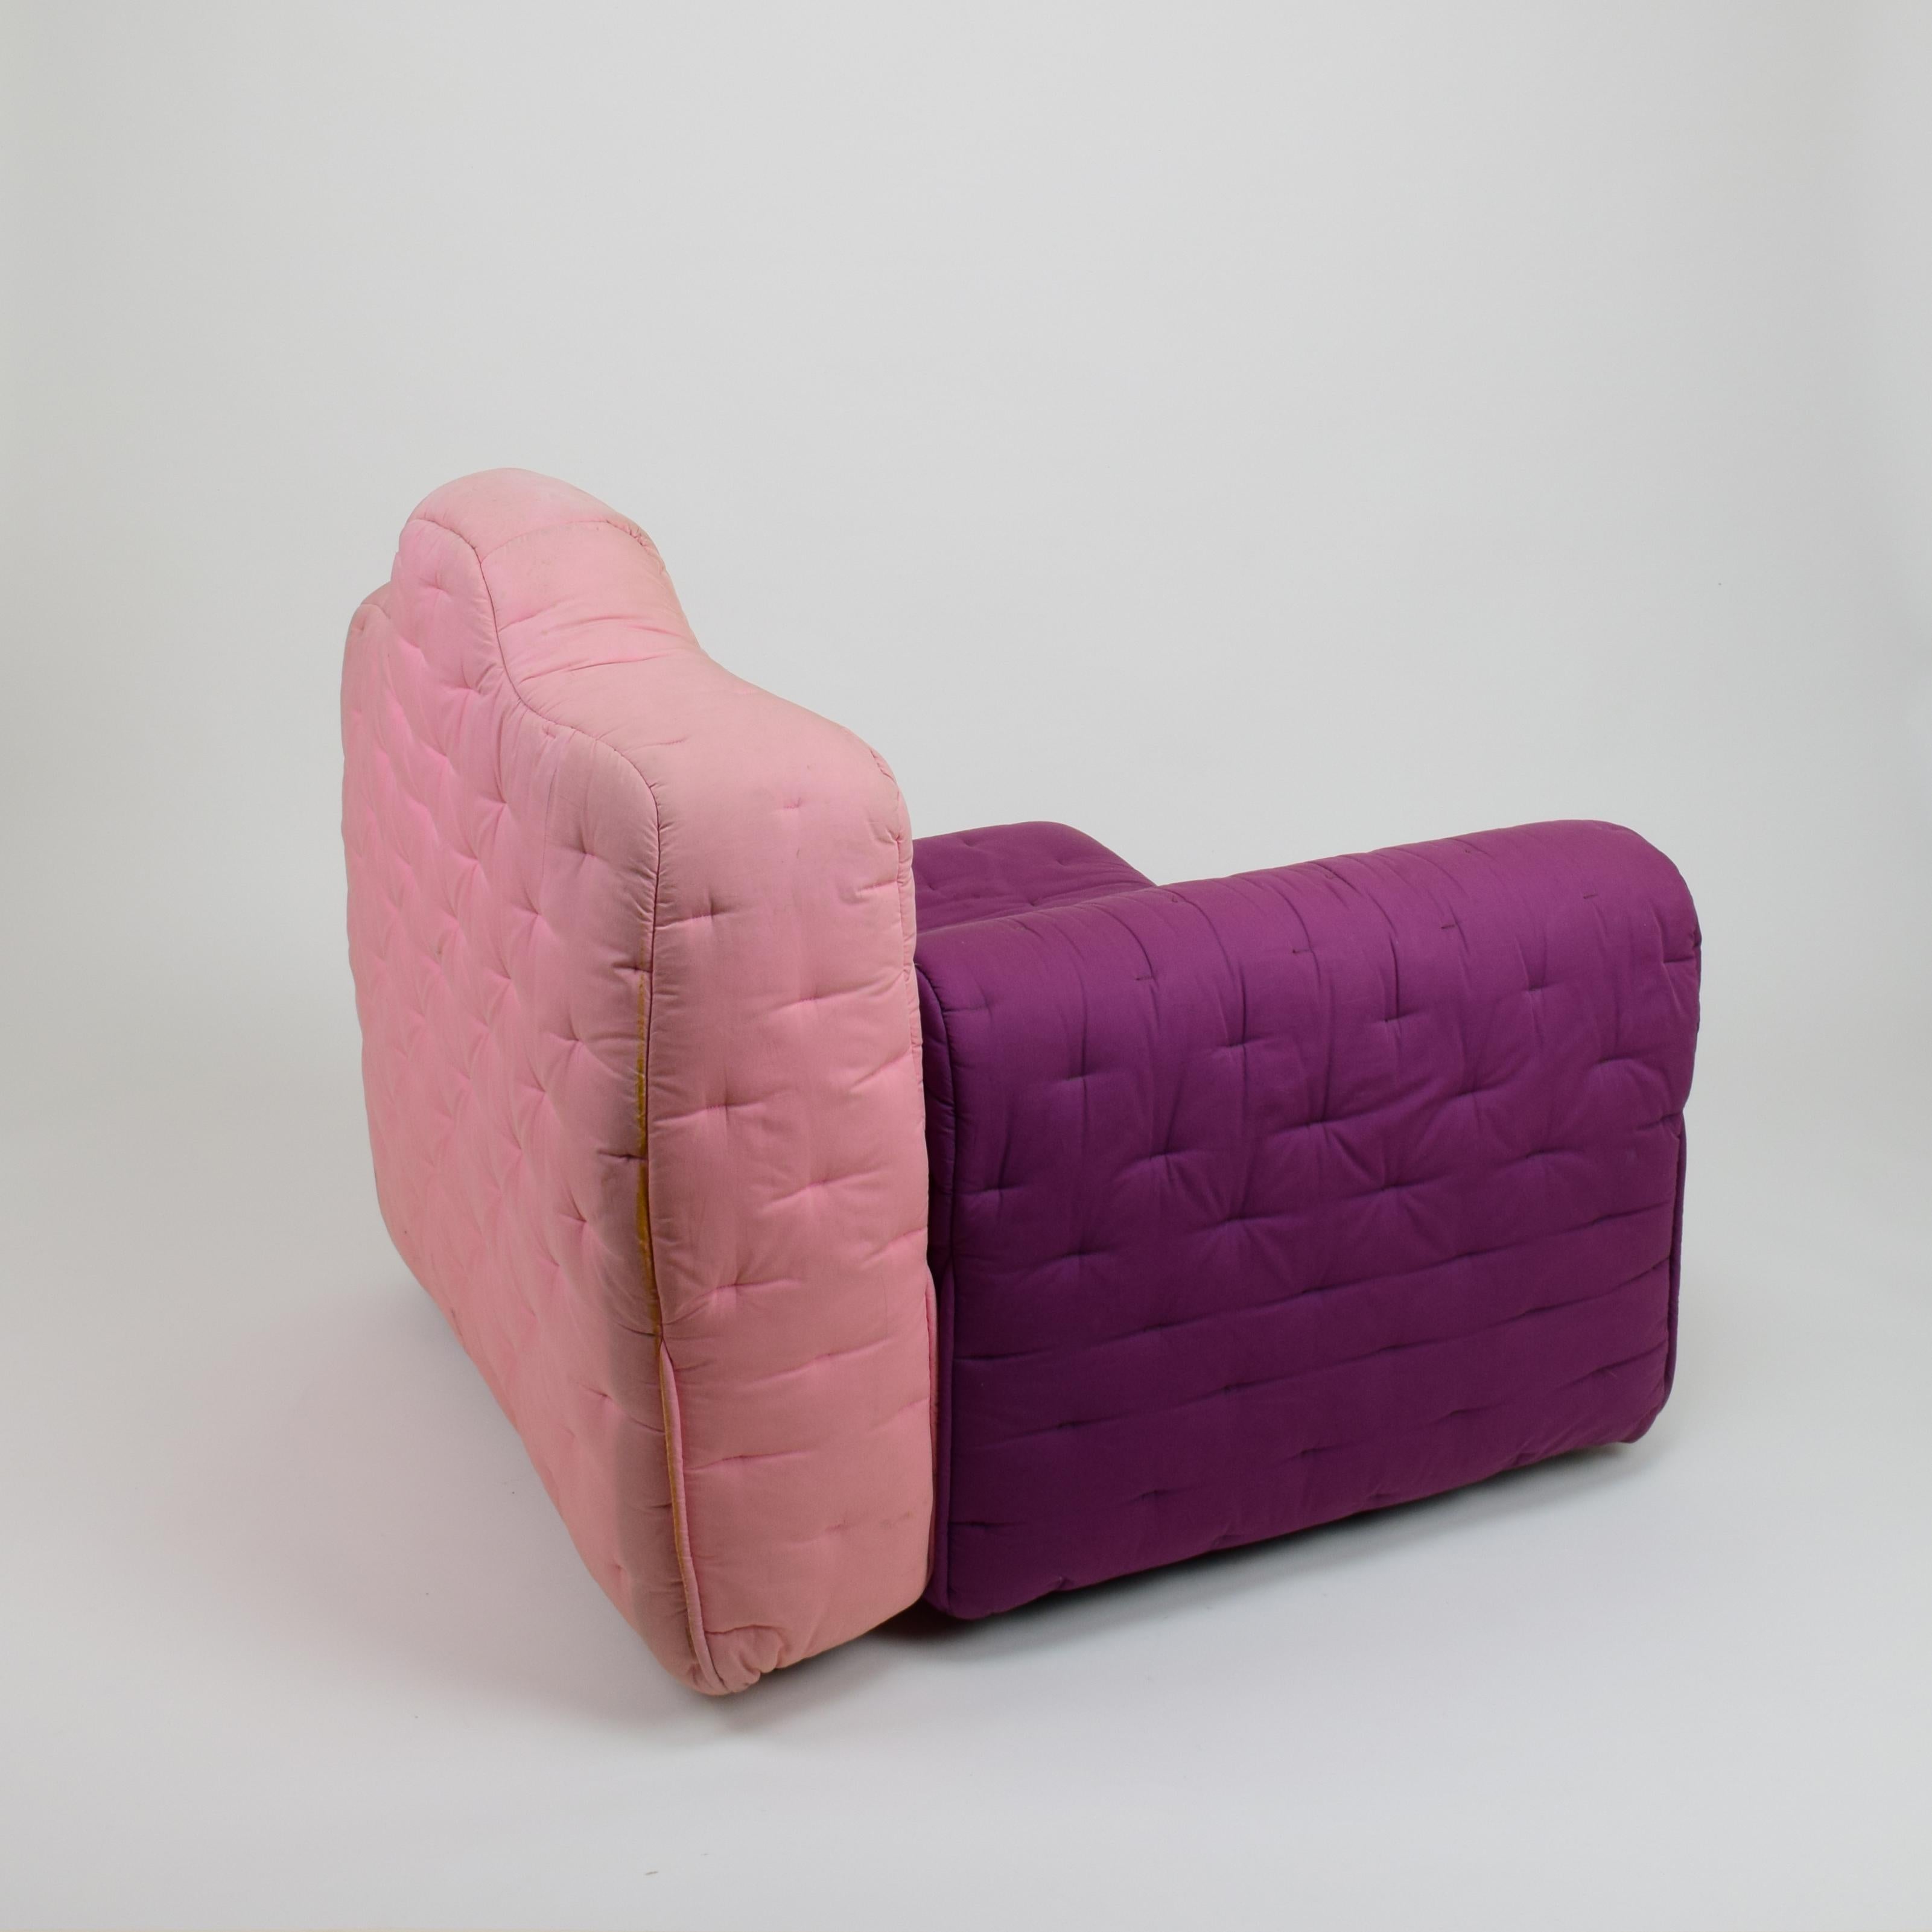 Gaetano Pesce, 'Cannaregio' Armchair, Cassina Italy 1987, Large Pink and Purple In Good Condition For Sale In London, GB